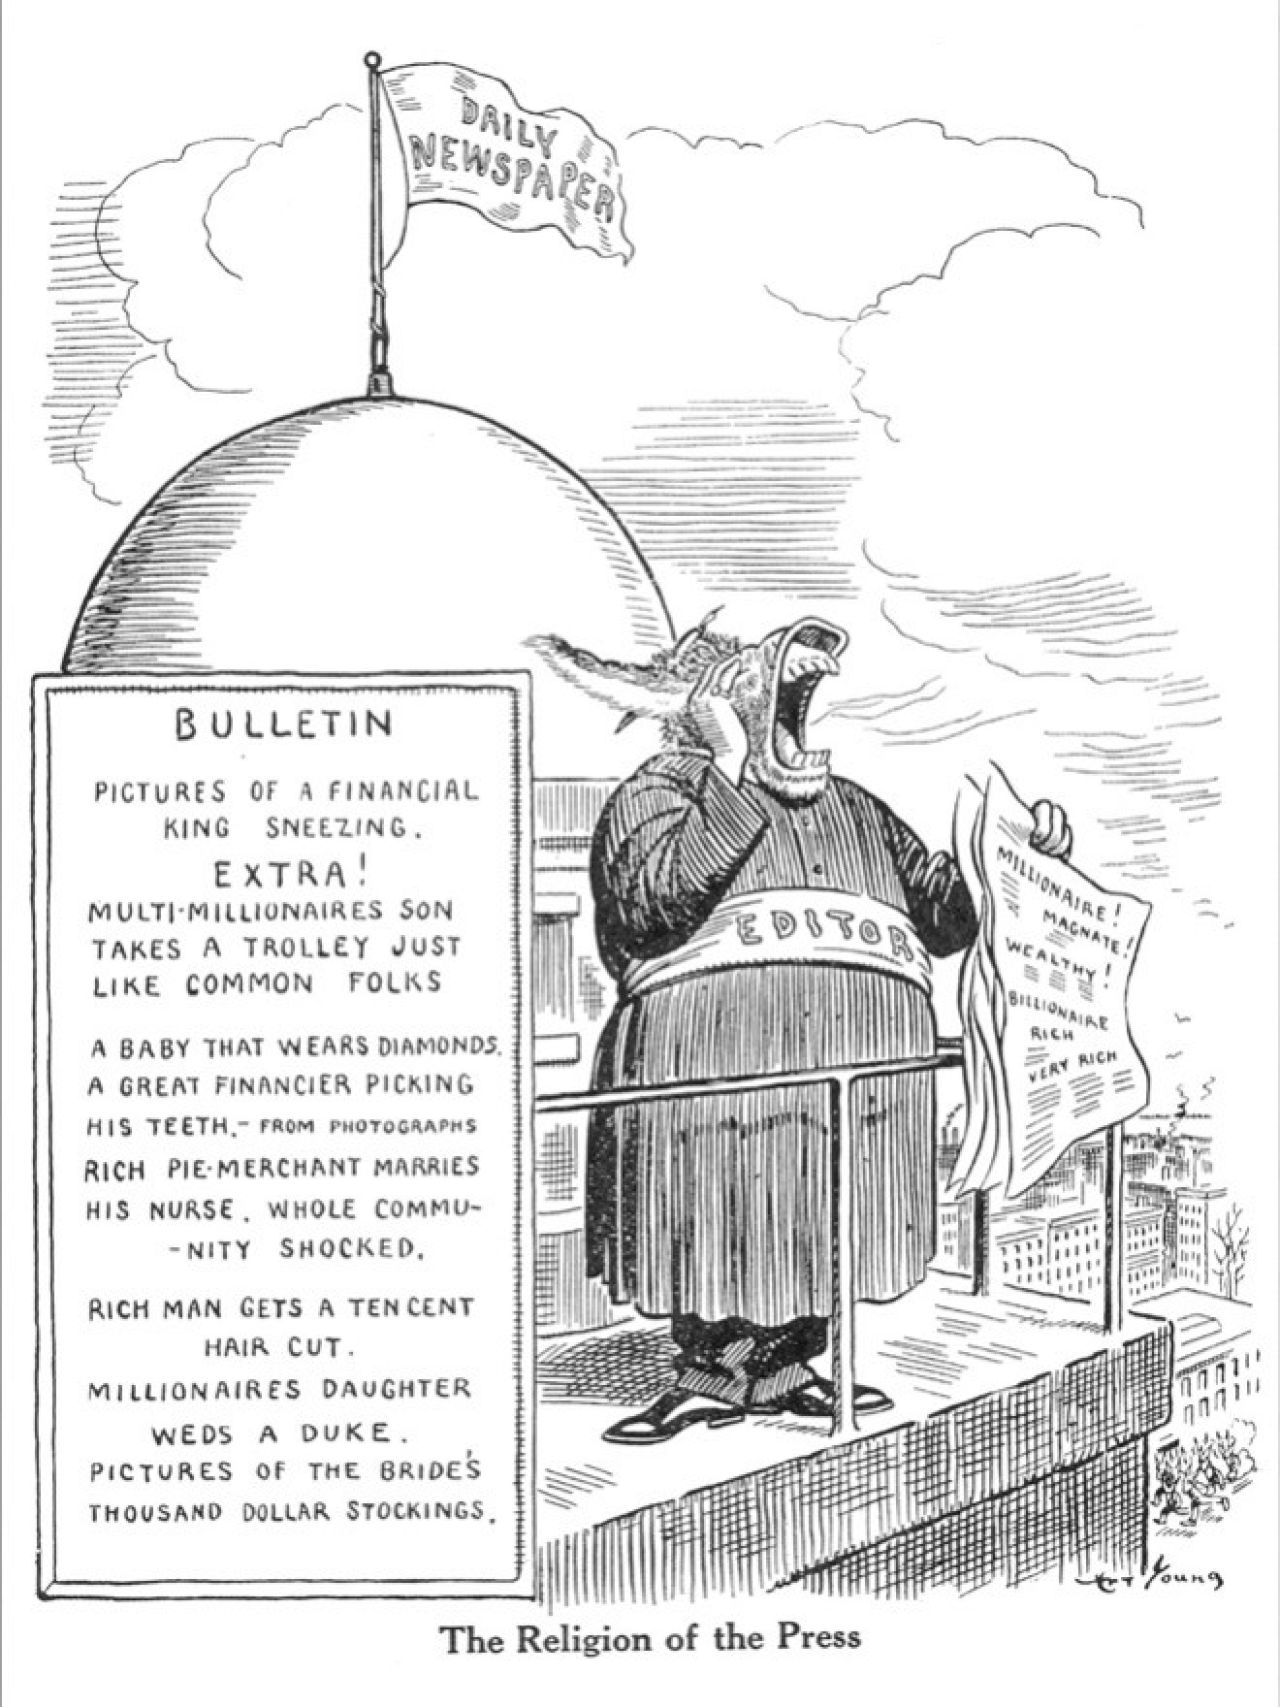 1920 political cartoon drawn by Art Young depicts braying donkey labeled "Editor" screaming headlines from the roof of "The Daily Newspaper."